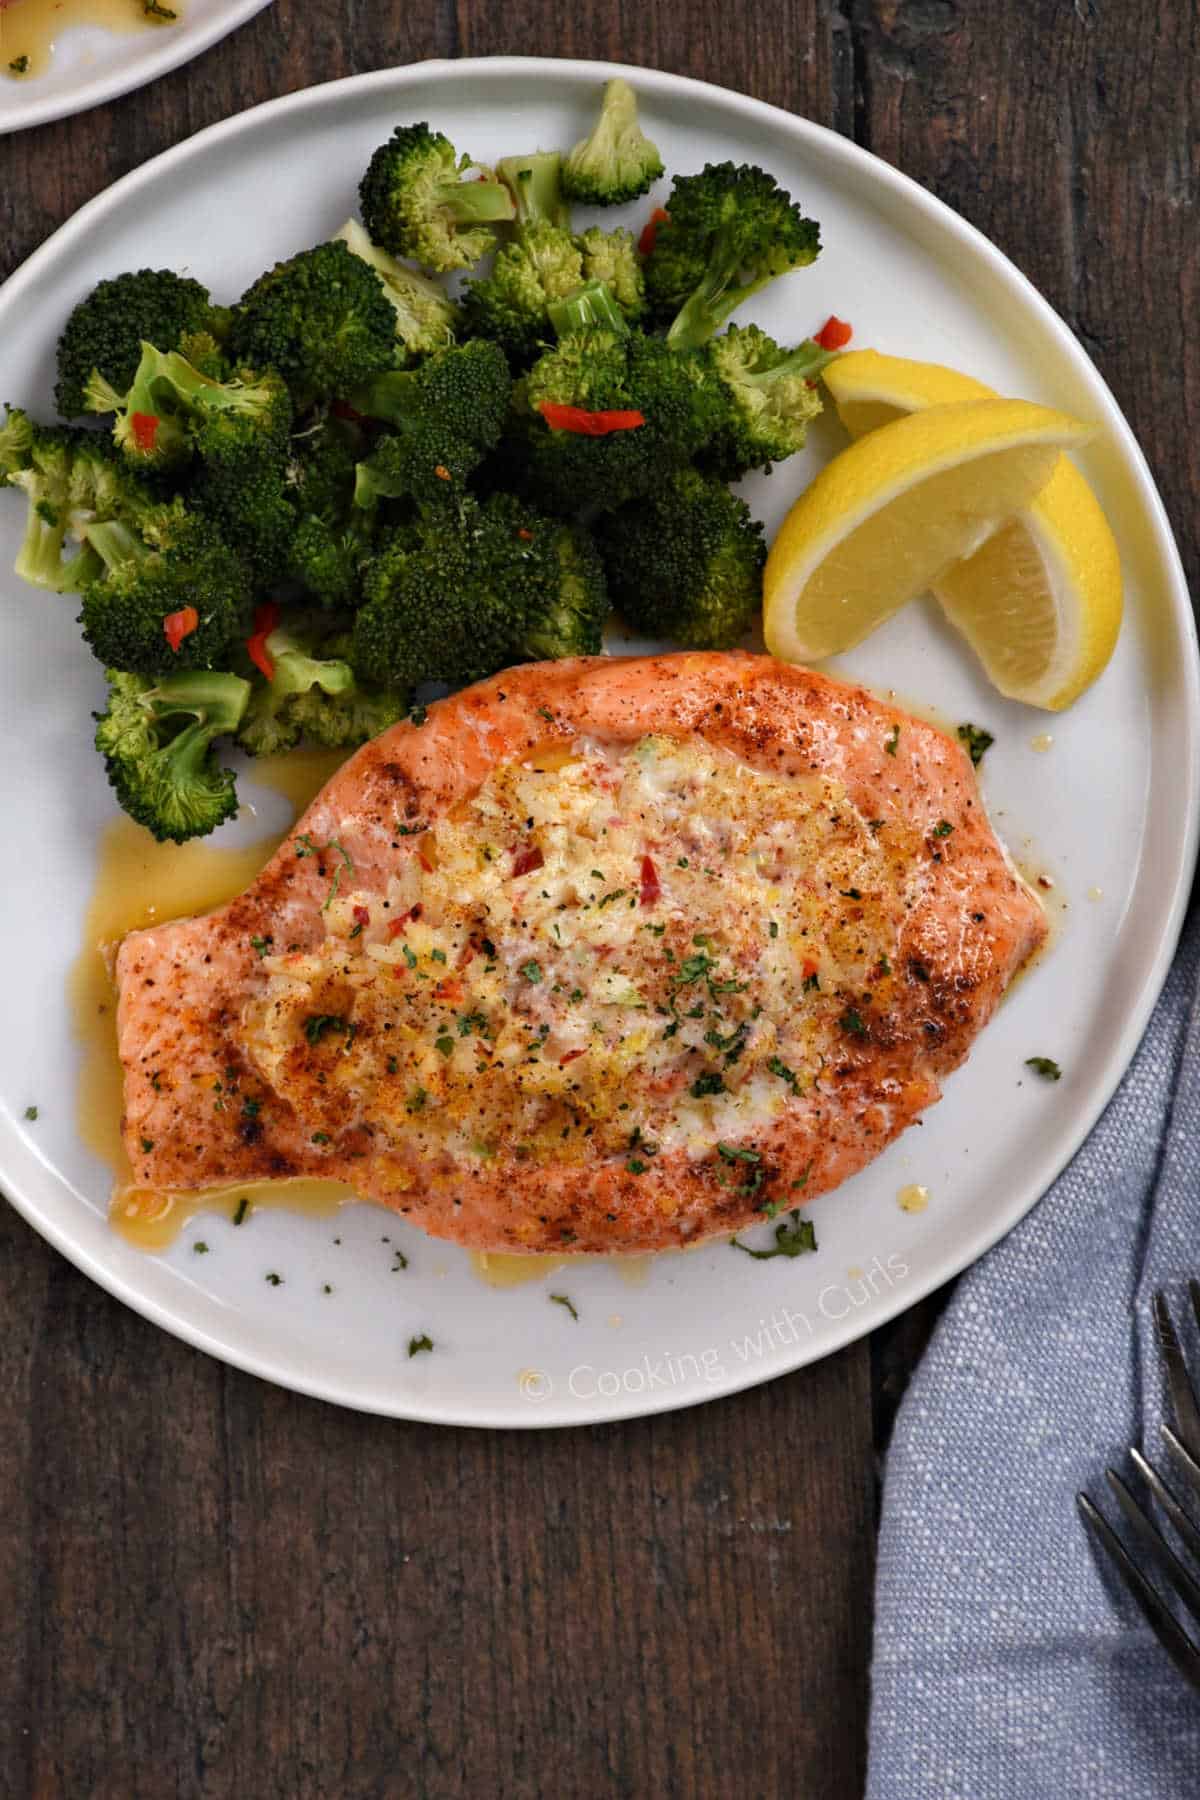 Salmon with crab filling on a plate with steamed broccoli and lemon wedges.